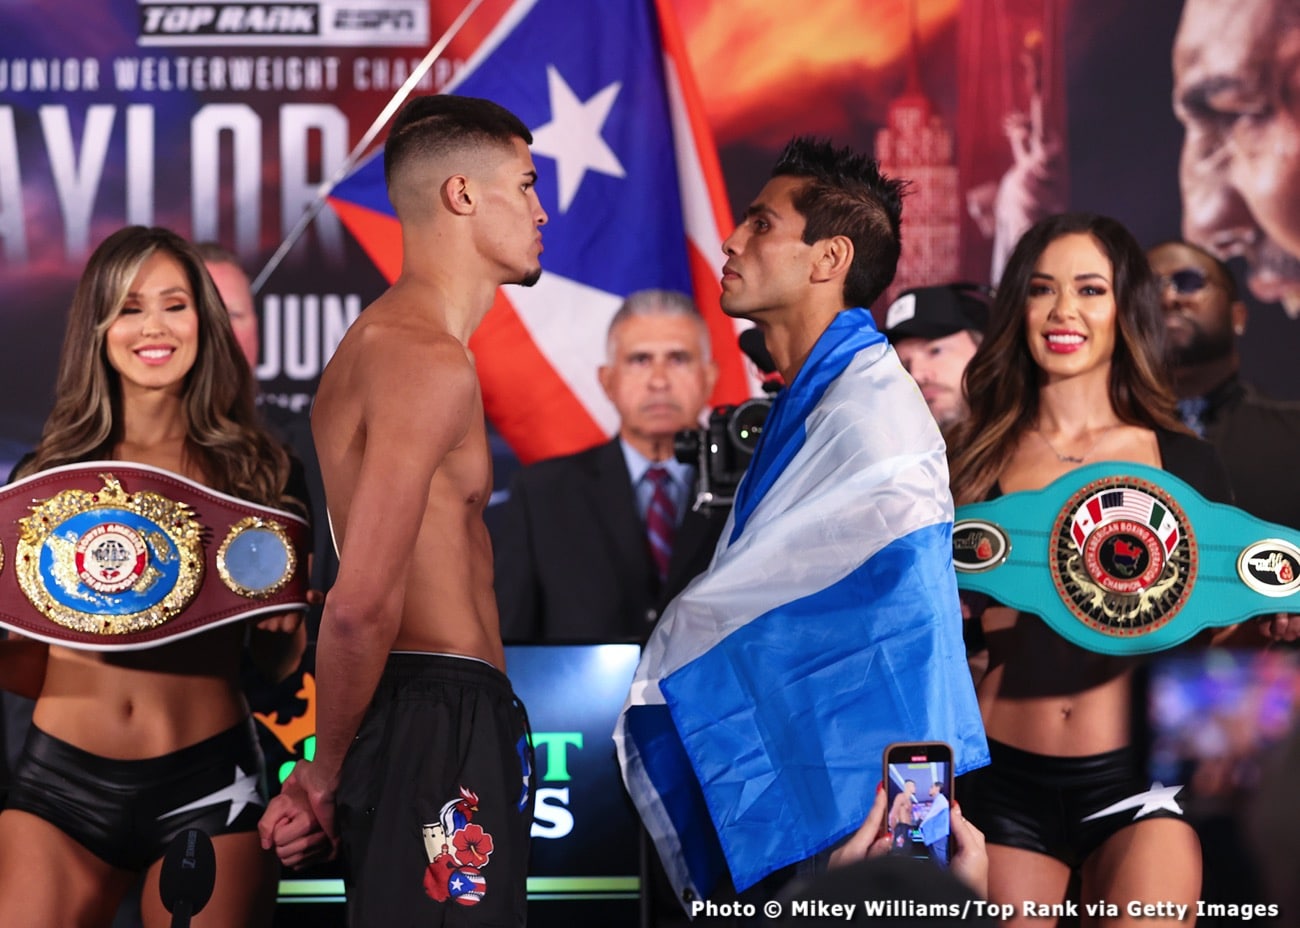 Image: Josh Taylor 139.8 vs. Teofimo Lopez 140 -Official ESPN Weigh In Results